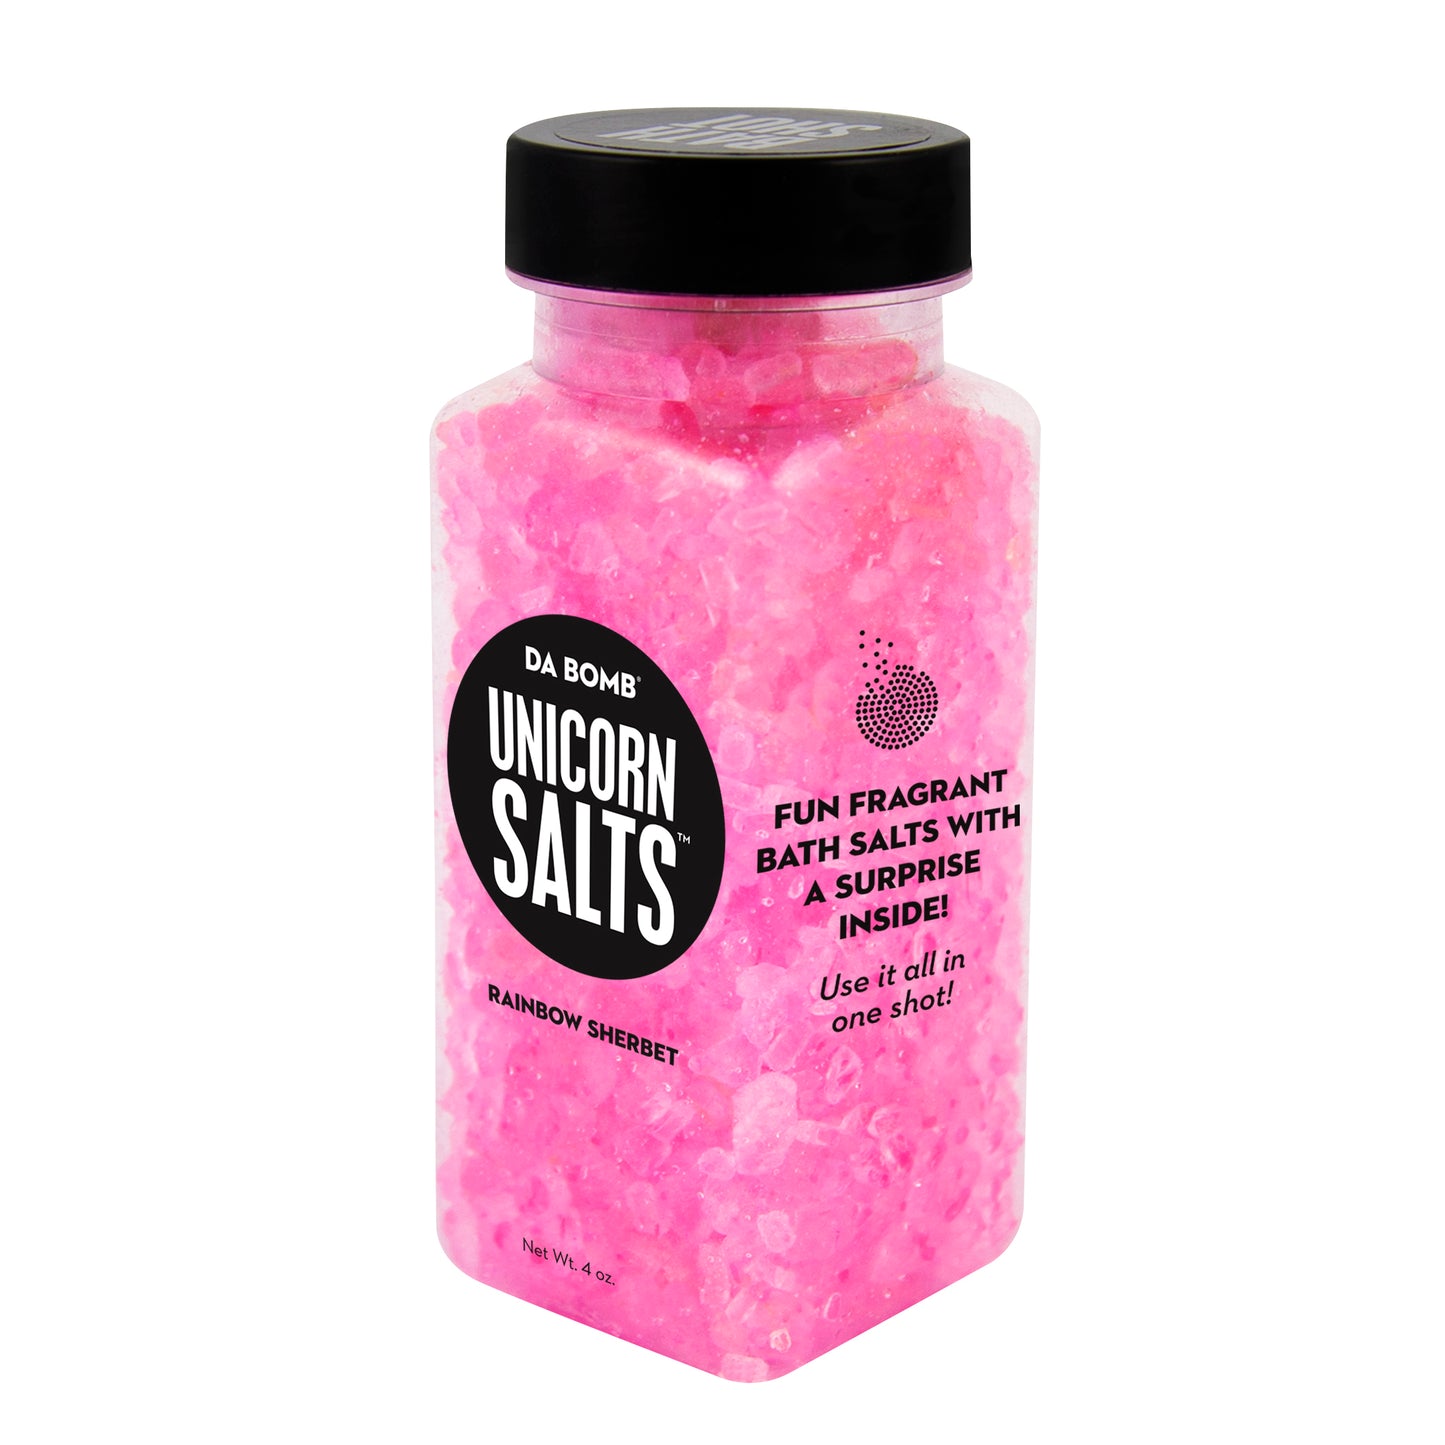 Small, clear plastic jar filled with pink bath salt that smells like rainbow sherbet. Each shot contains a fun surprise.